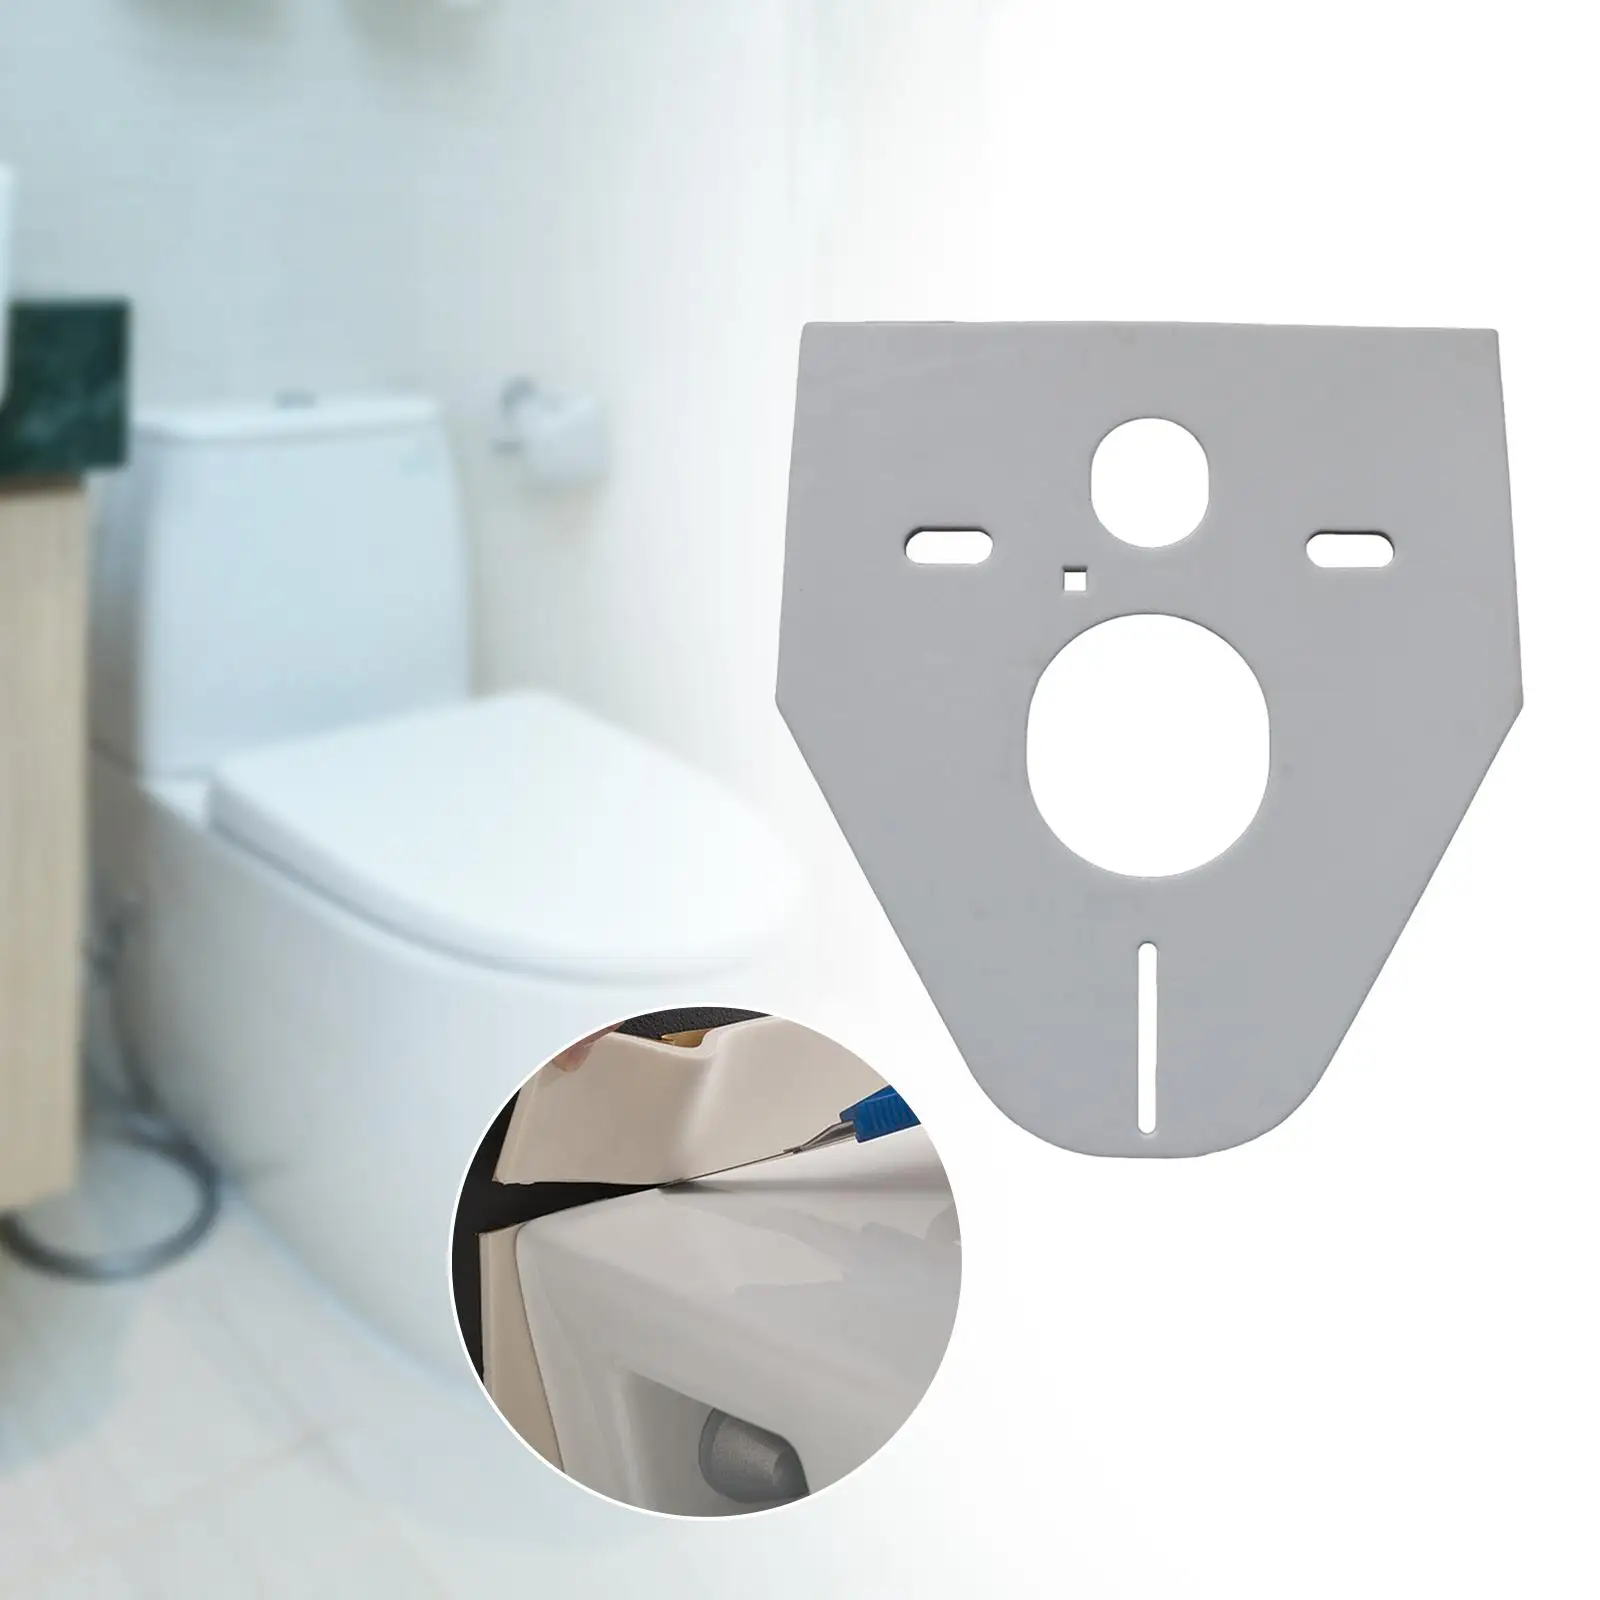 Sound Noise Insulation Mat Gasket Set, Wall Hung Toilet Frame Accessories, Noise Insulation Pad, Thicken, Self Paste